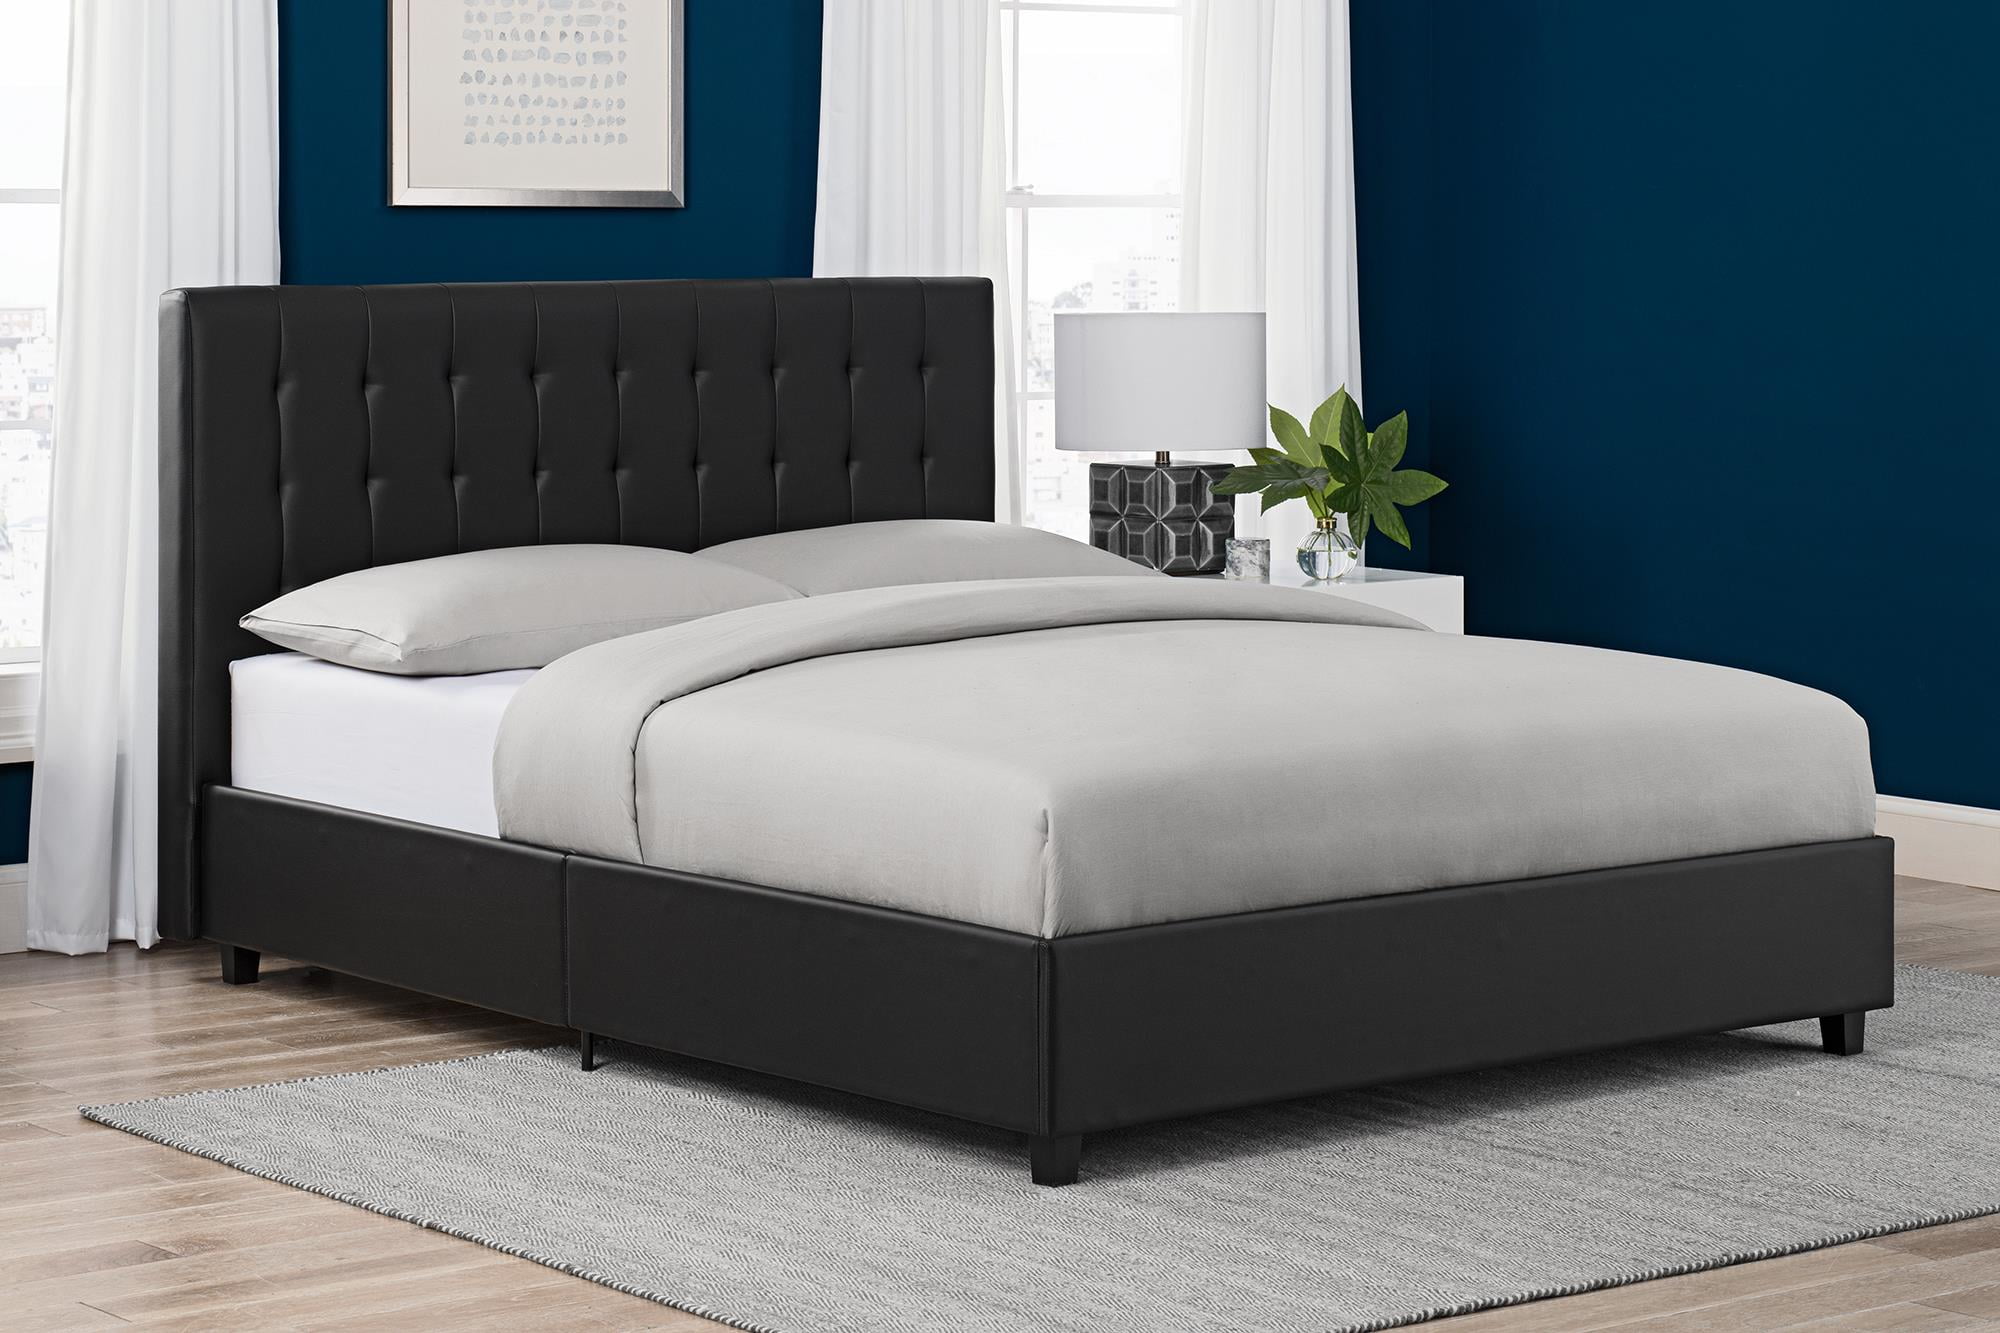 Dhp Emily Upholstered Bed Black Faux Leather Multiple Sizes Full